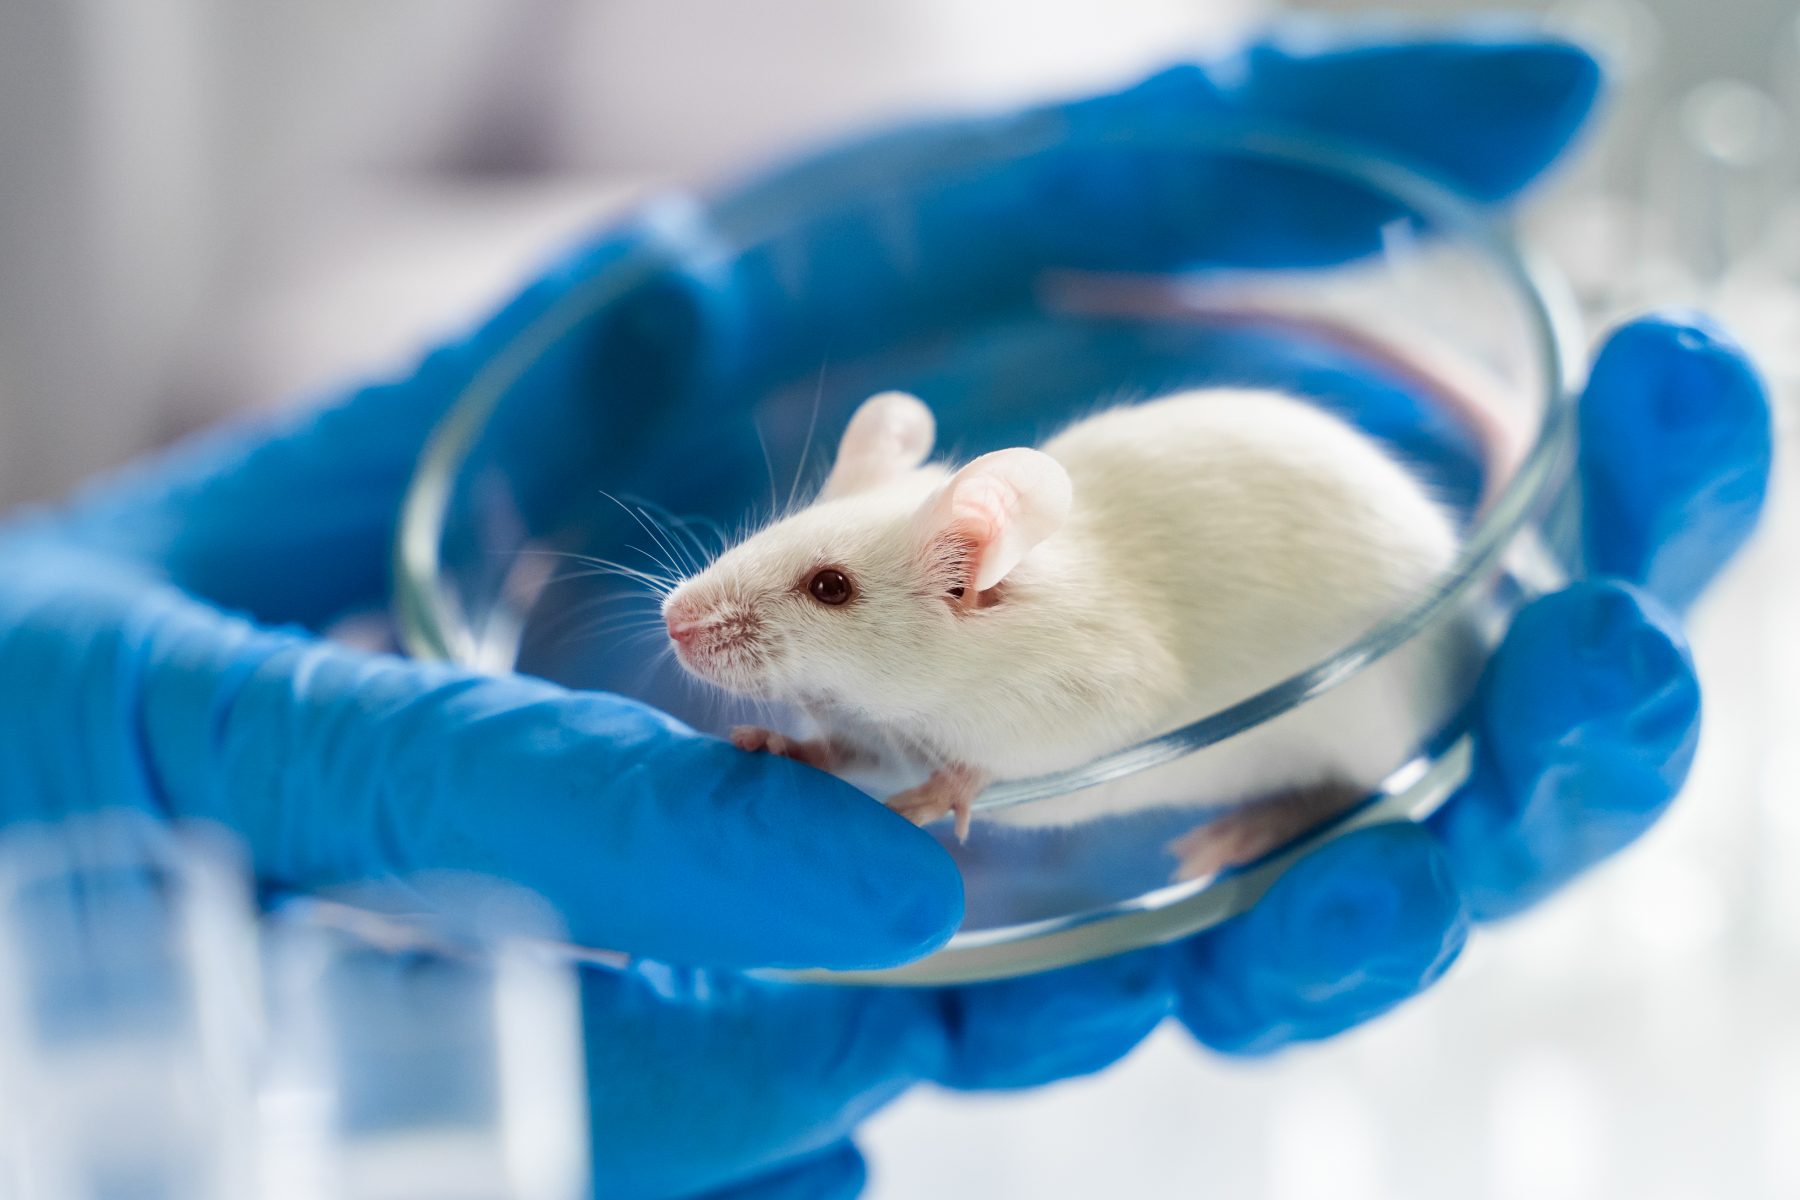 PRS-220 for IPF | Pulmonary Fibrosis News | experimental inhaled therapy mouse study